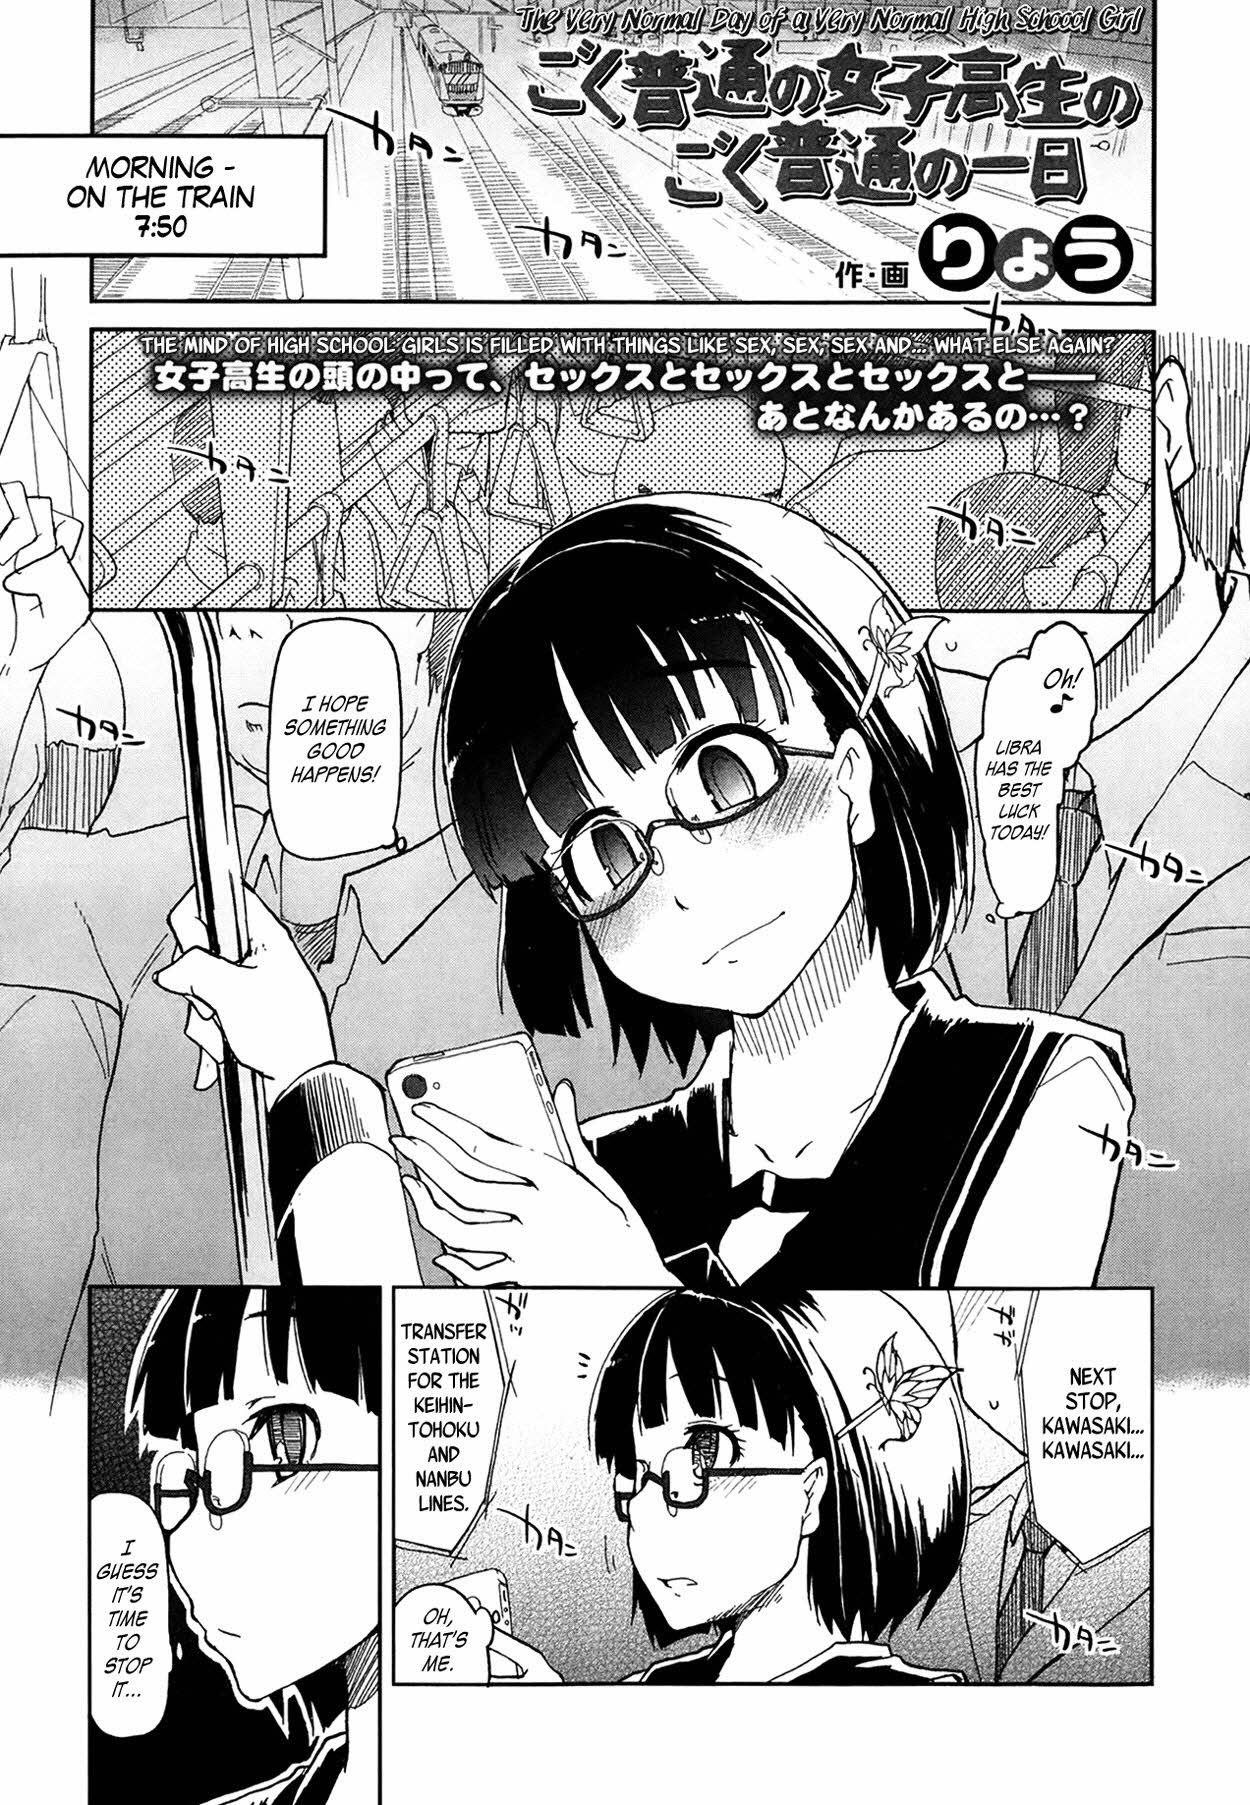 [Ryo] The Very Normal Day of a Very Normal High School Girl Hentai Comics